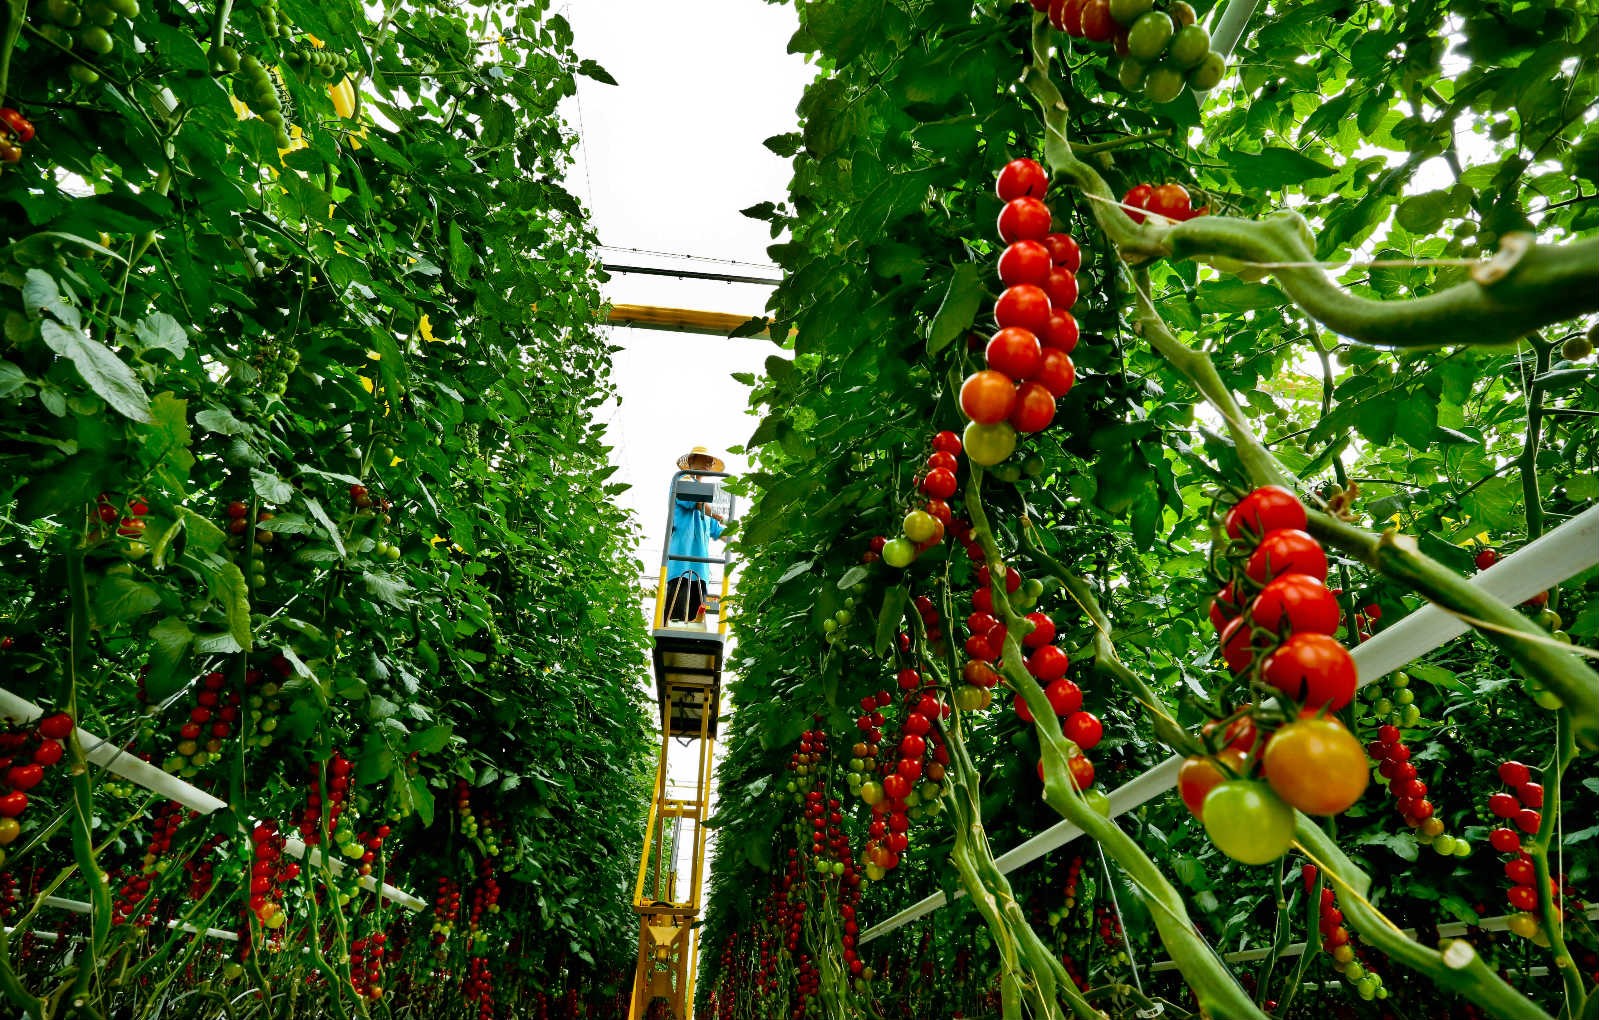 NW China's Zhangye achieves rich fruits in developing agriculture in Gobi desert